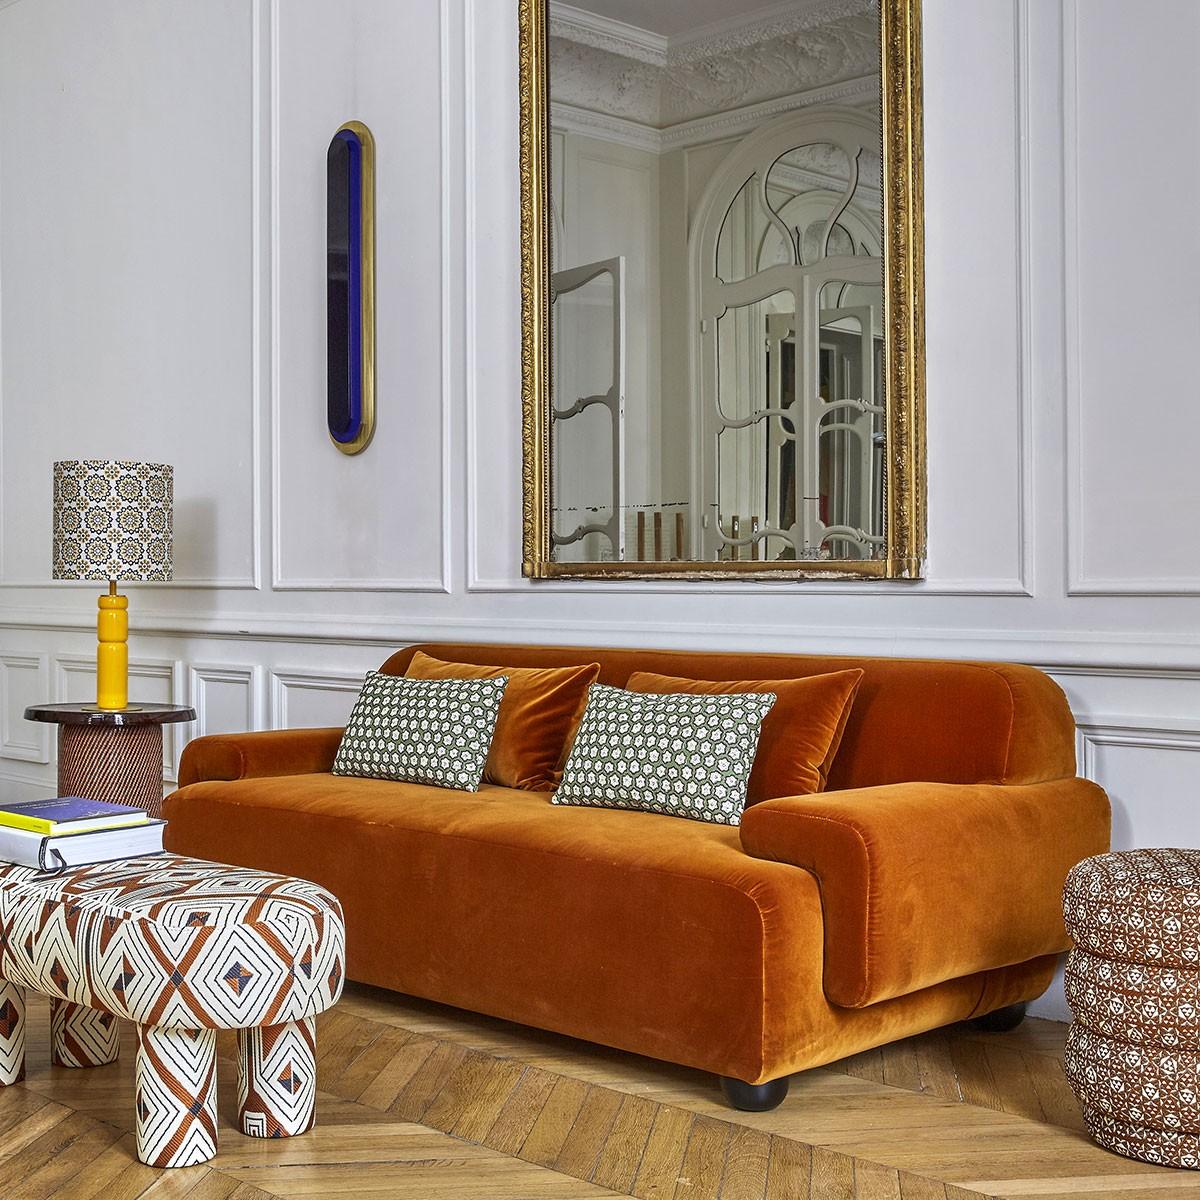 Popus Editions Lena 4 Seater Sofa in Eggplant Megeve Fabric with Knit Effect

It looks like it's straight out of a movie, with its generous curves and wide armrests. It is a real invitation to spend long Sundays with the family, comfortably seated